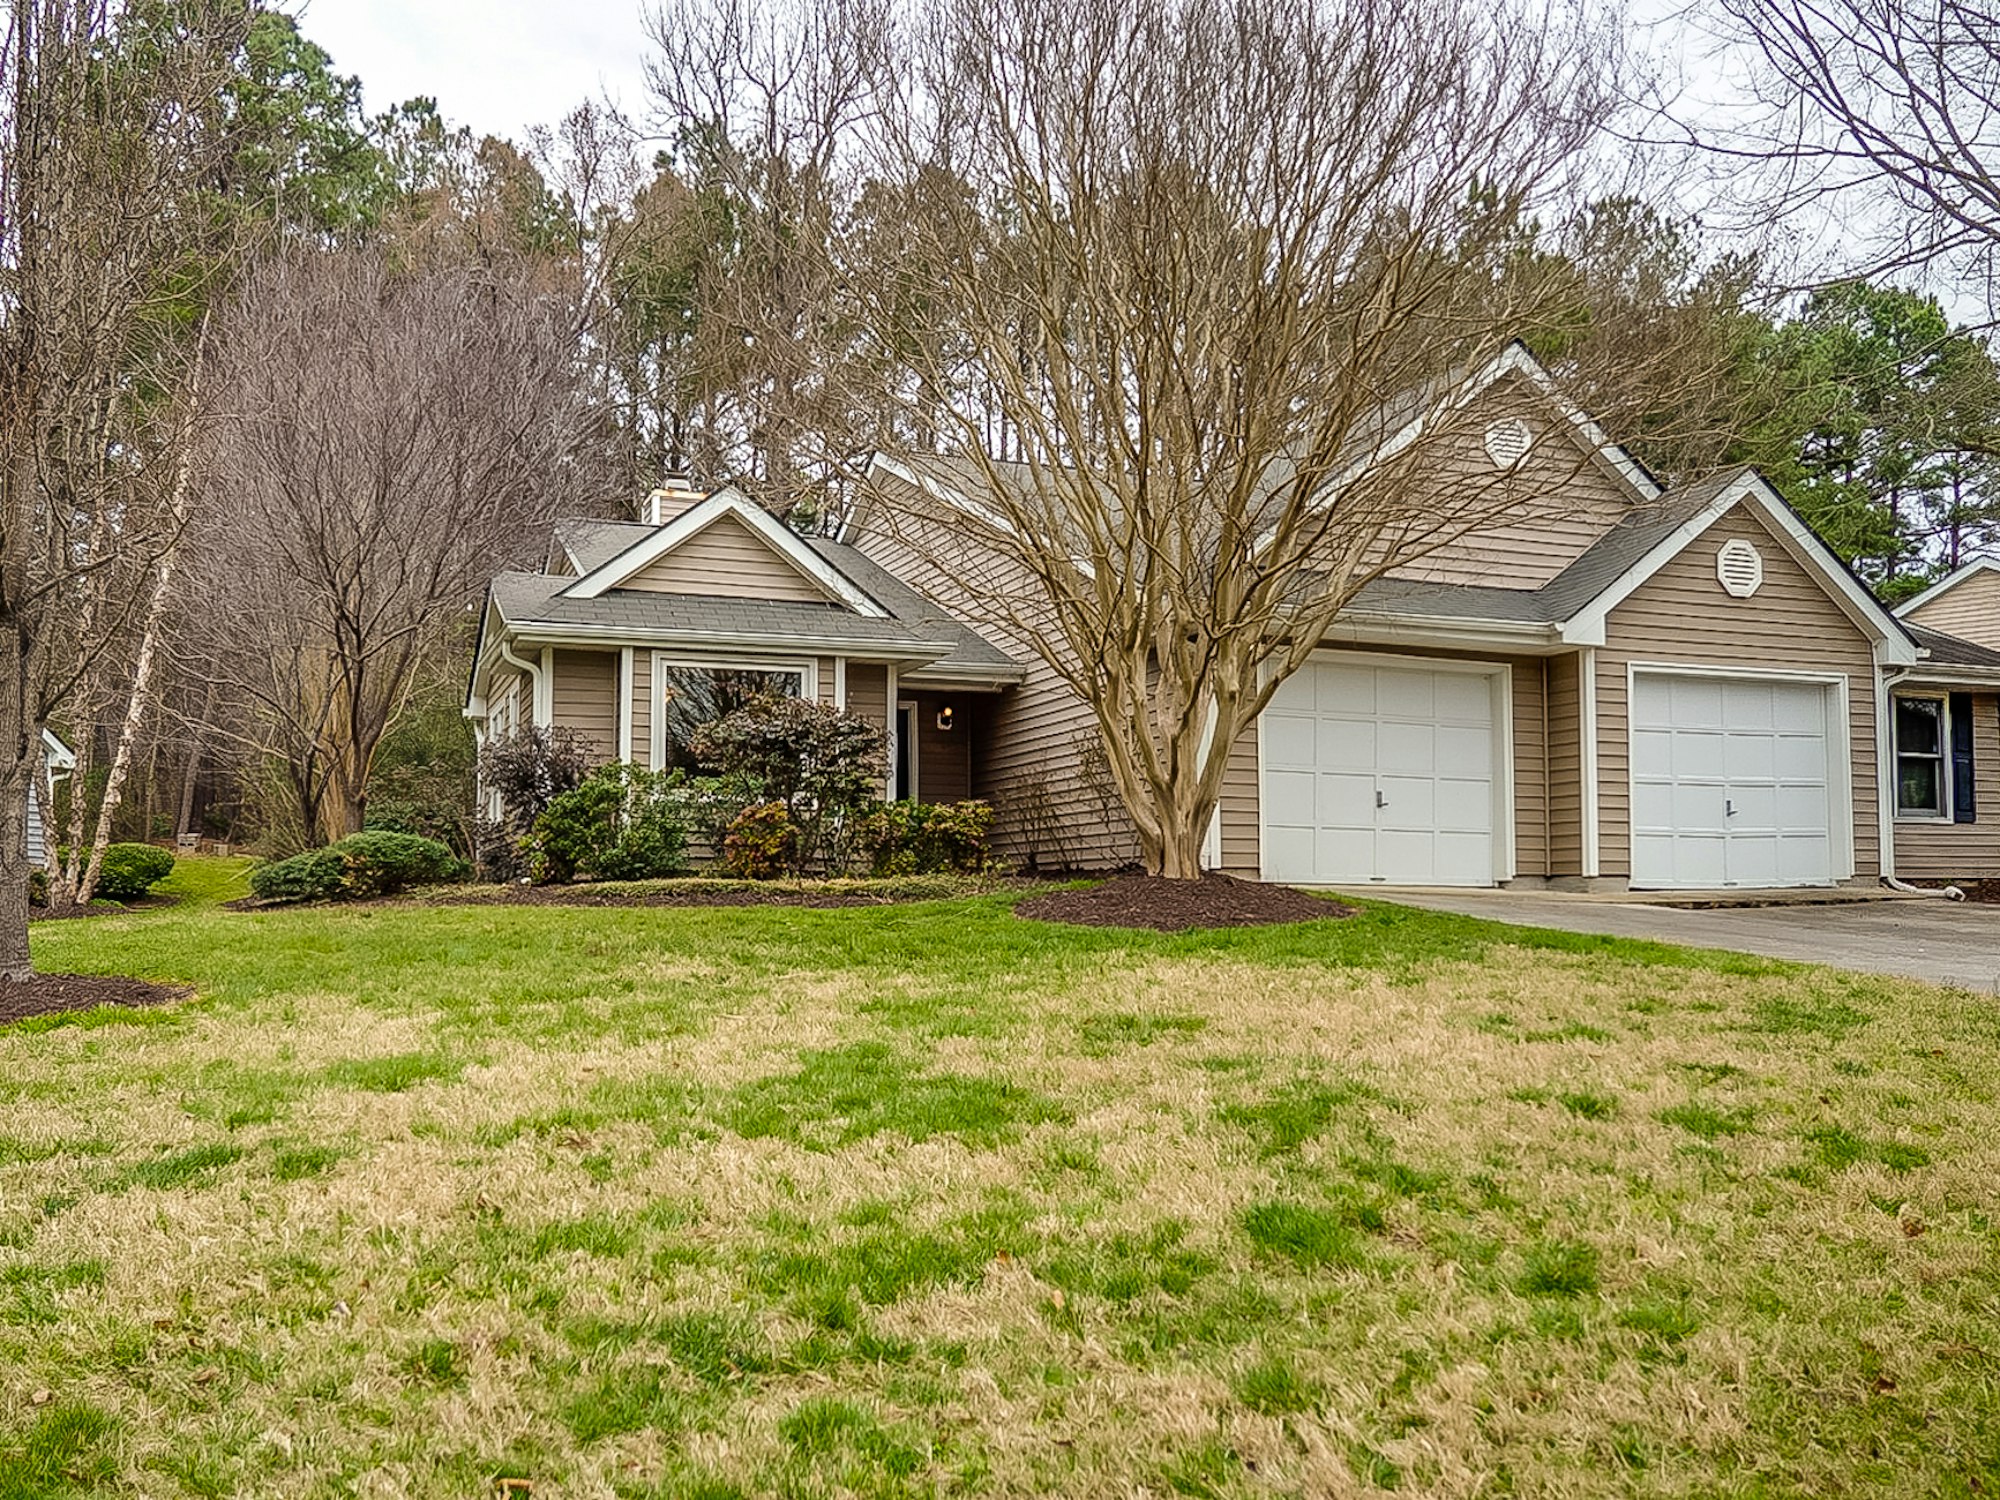 Photo 1 of 16 - 117 Standish Dr, Chapel Hill, NC 27517